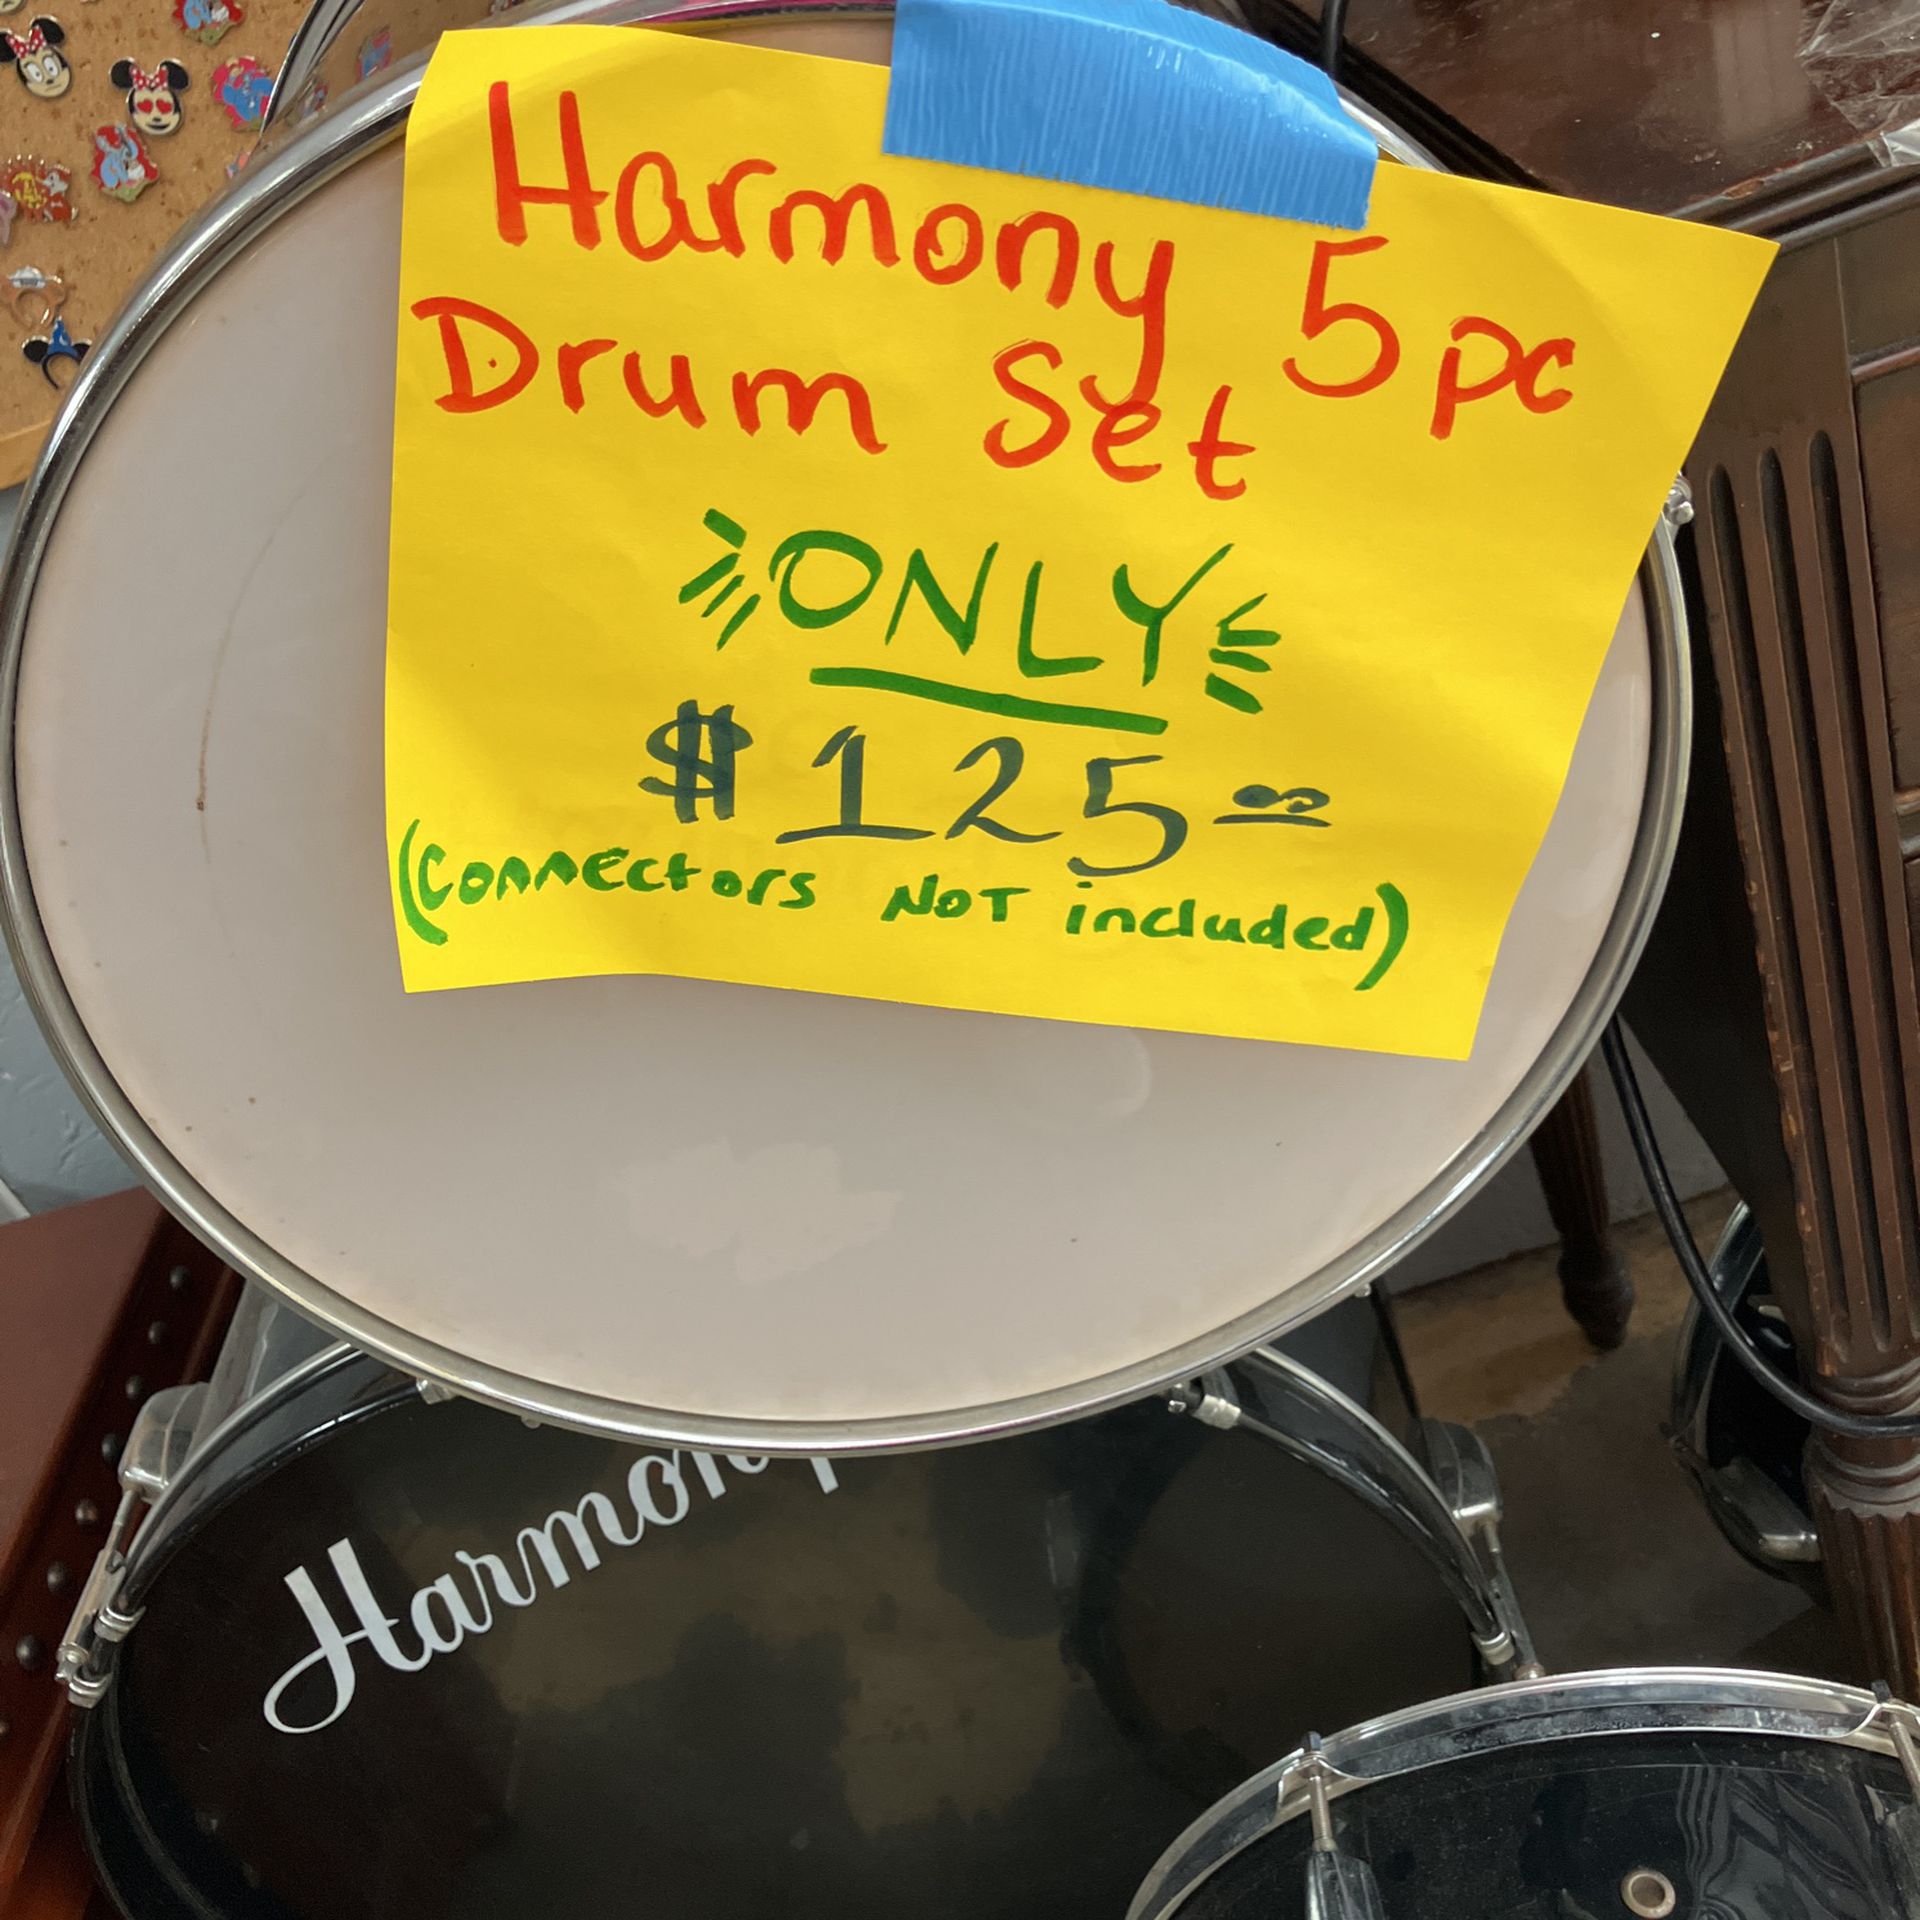 Harmony 5 Pc Drum Set Connectors Not Included 